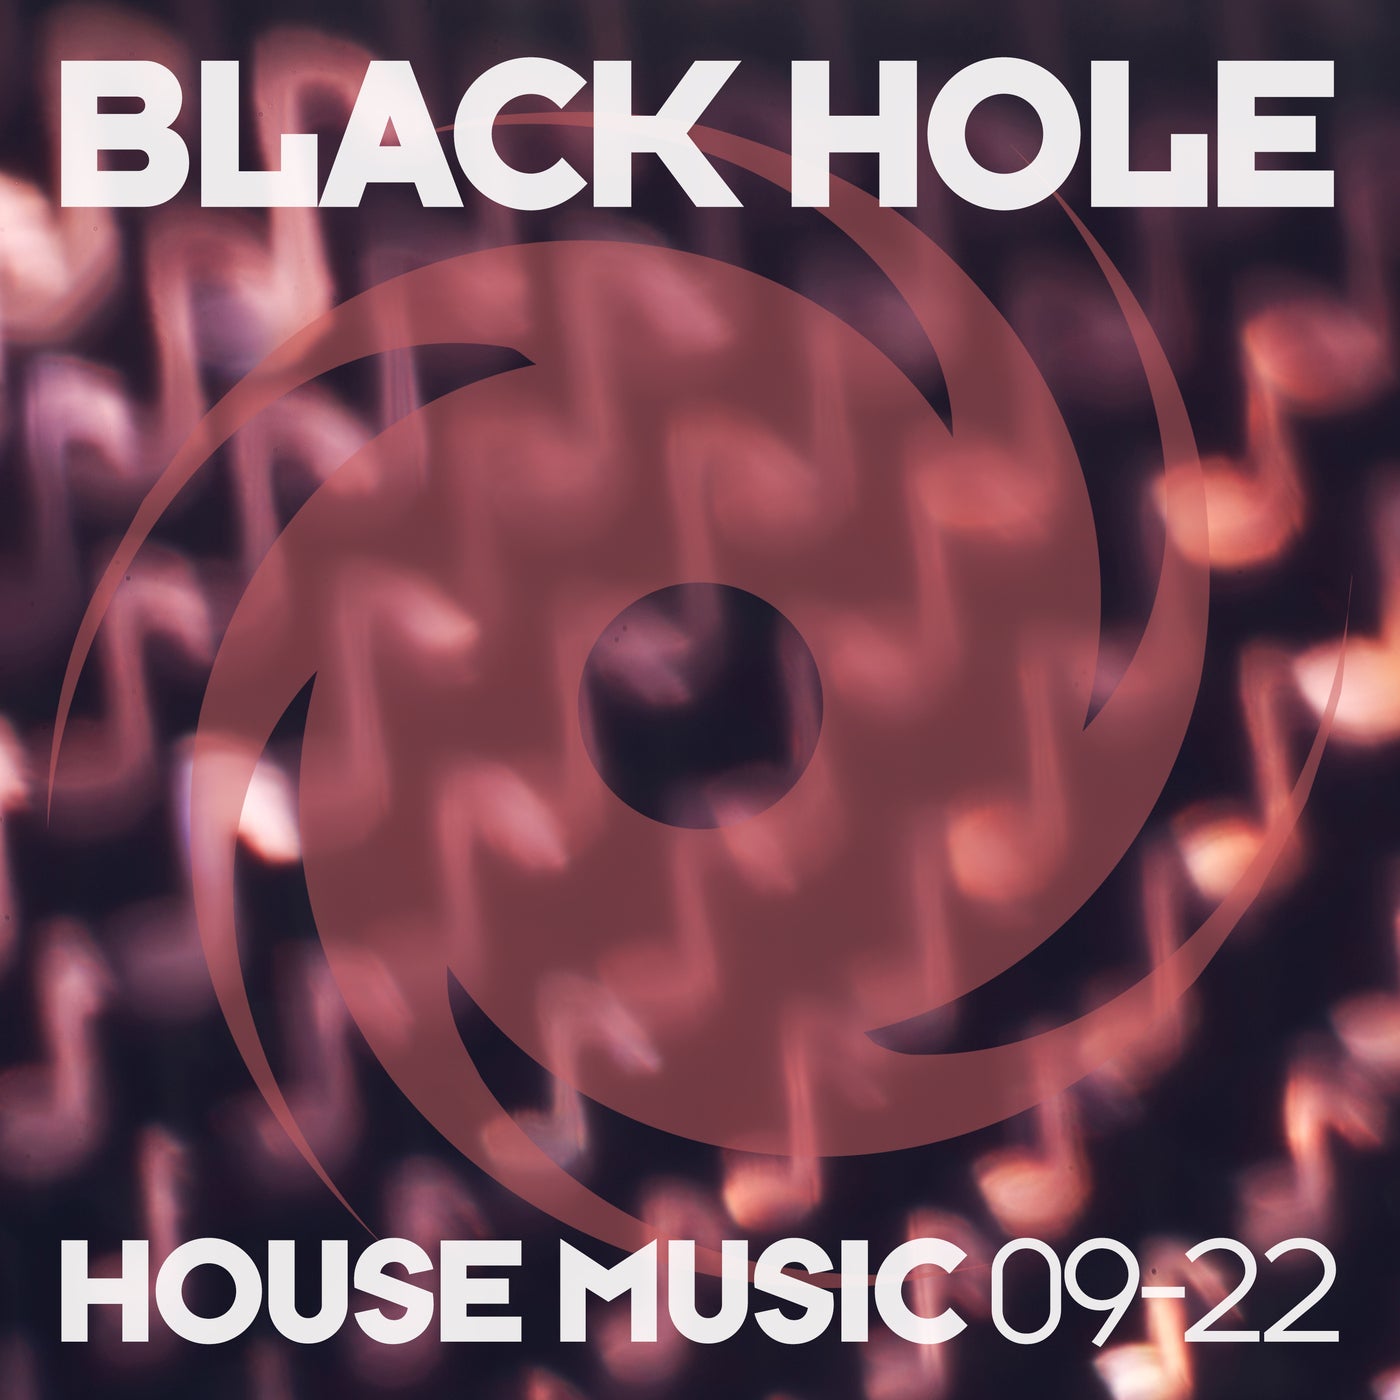 Black Hole House Music 09-22 from Black Hole Recordings on Beatport